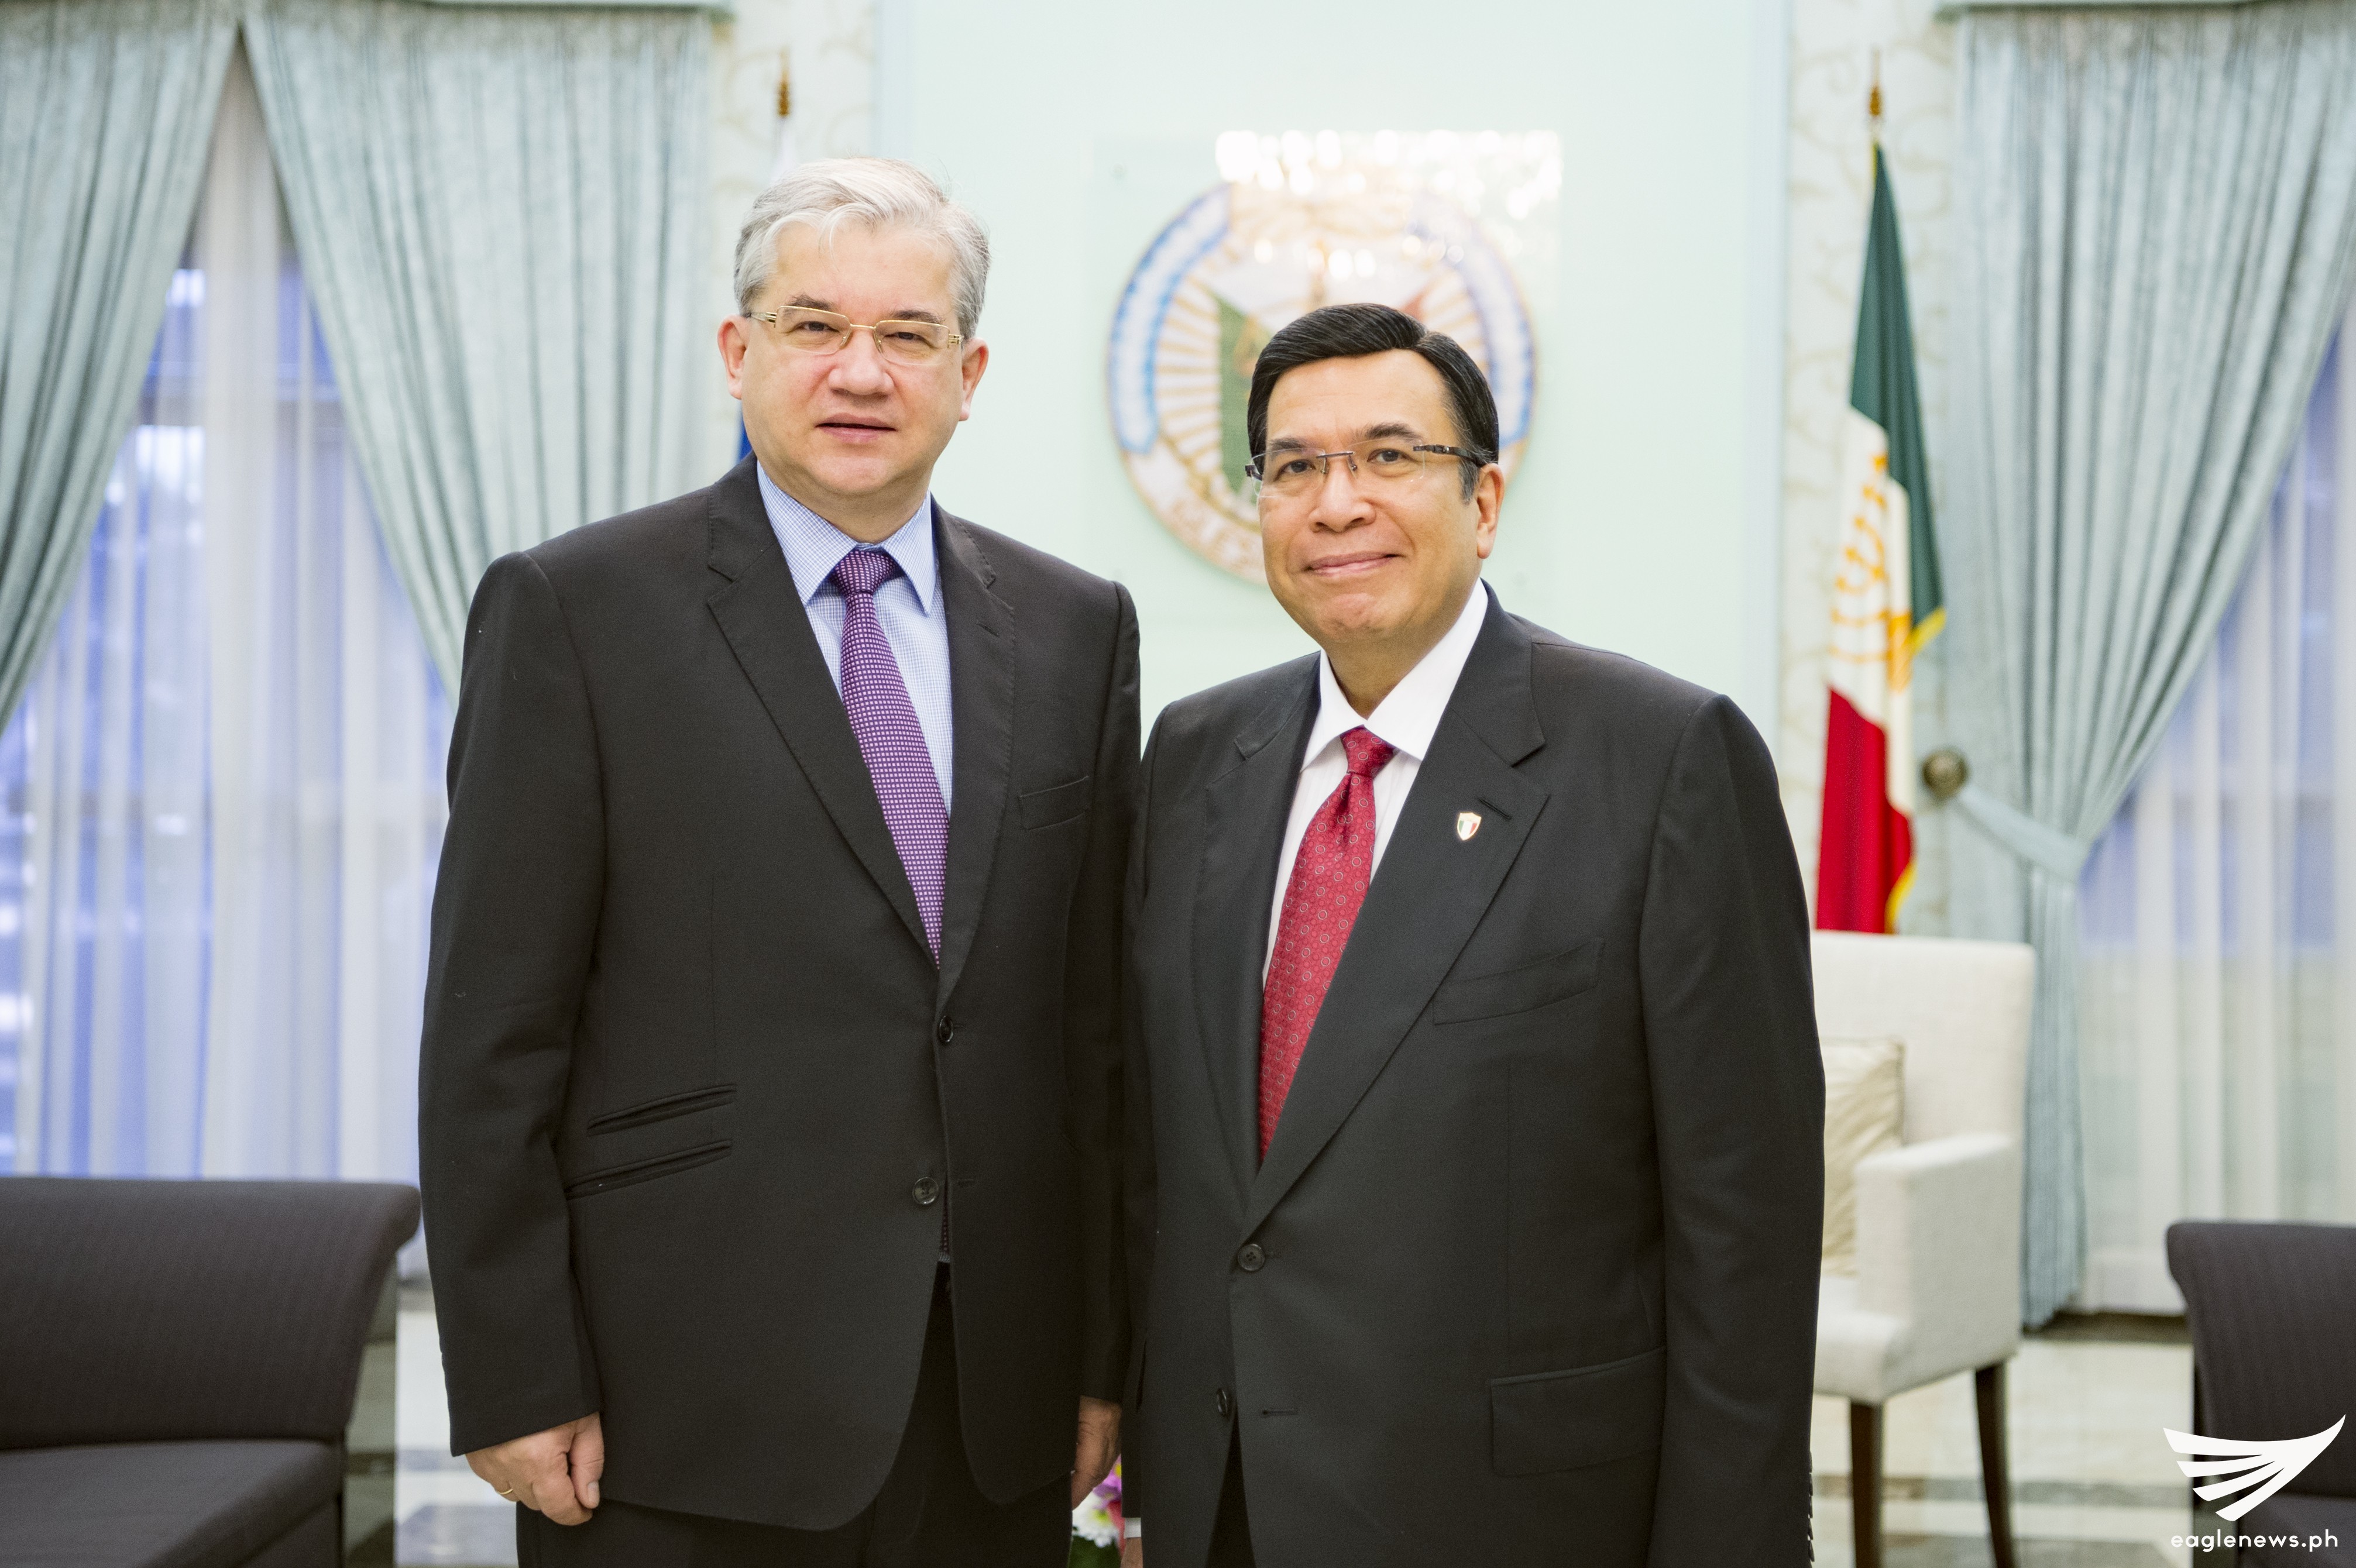 Russian Federation Ambassador Igor Anatolyevich Khovaev makes a courtesy call to Iglesia Ni Cristo Executive Minister Brother Eduardo V. Manalo on Tuesday, December 20, at the INC's Central Office in Quezon City, as he pushed for more "people to people contact" between Russia and the Philippines. (Eagle News Service)